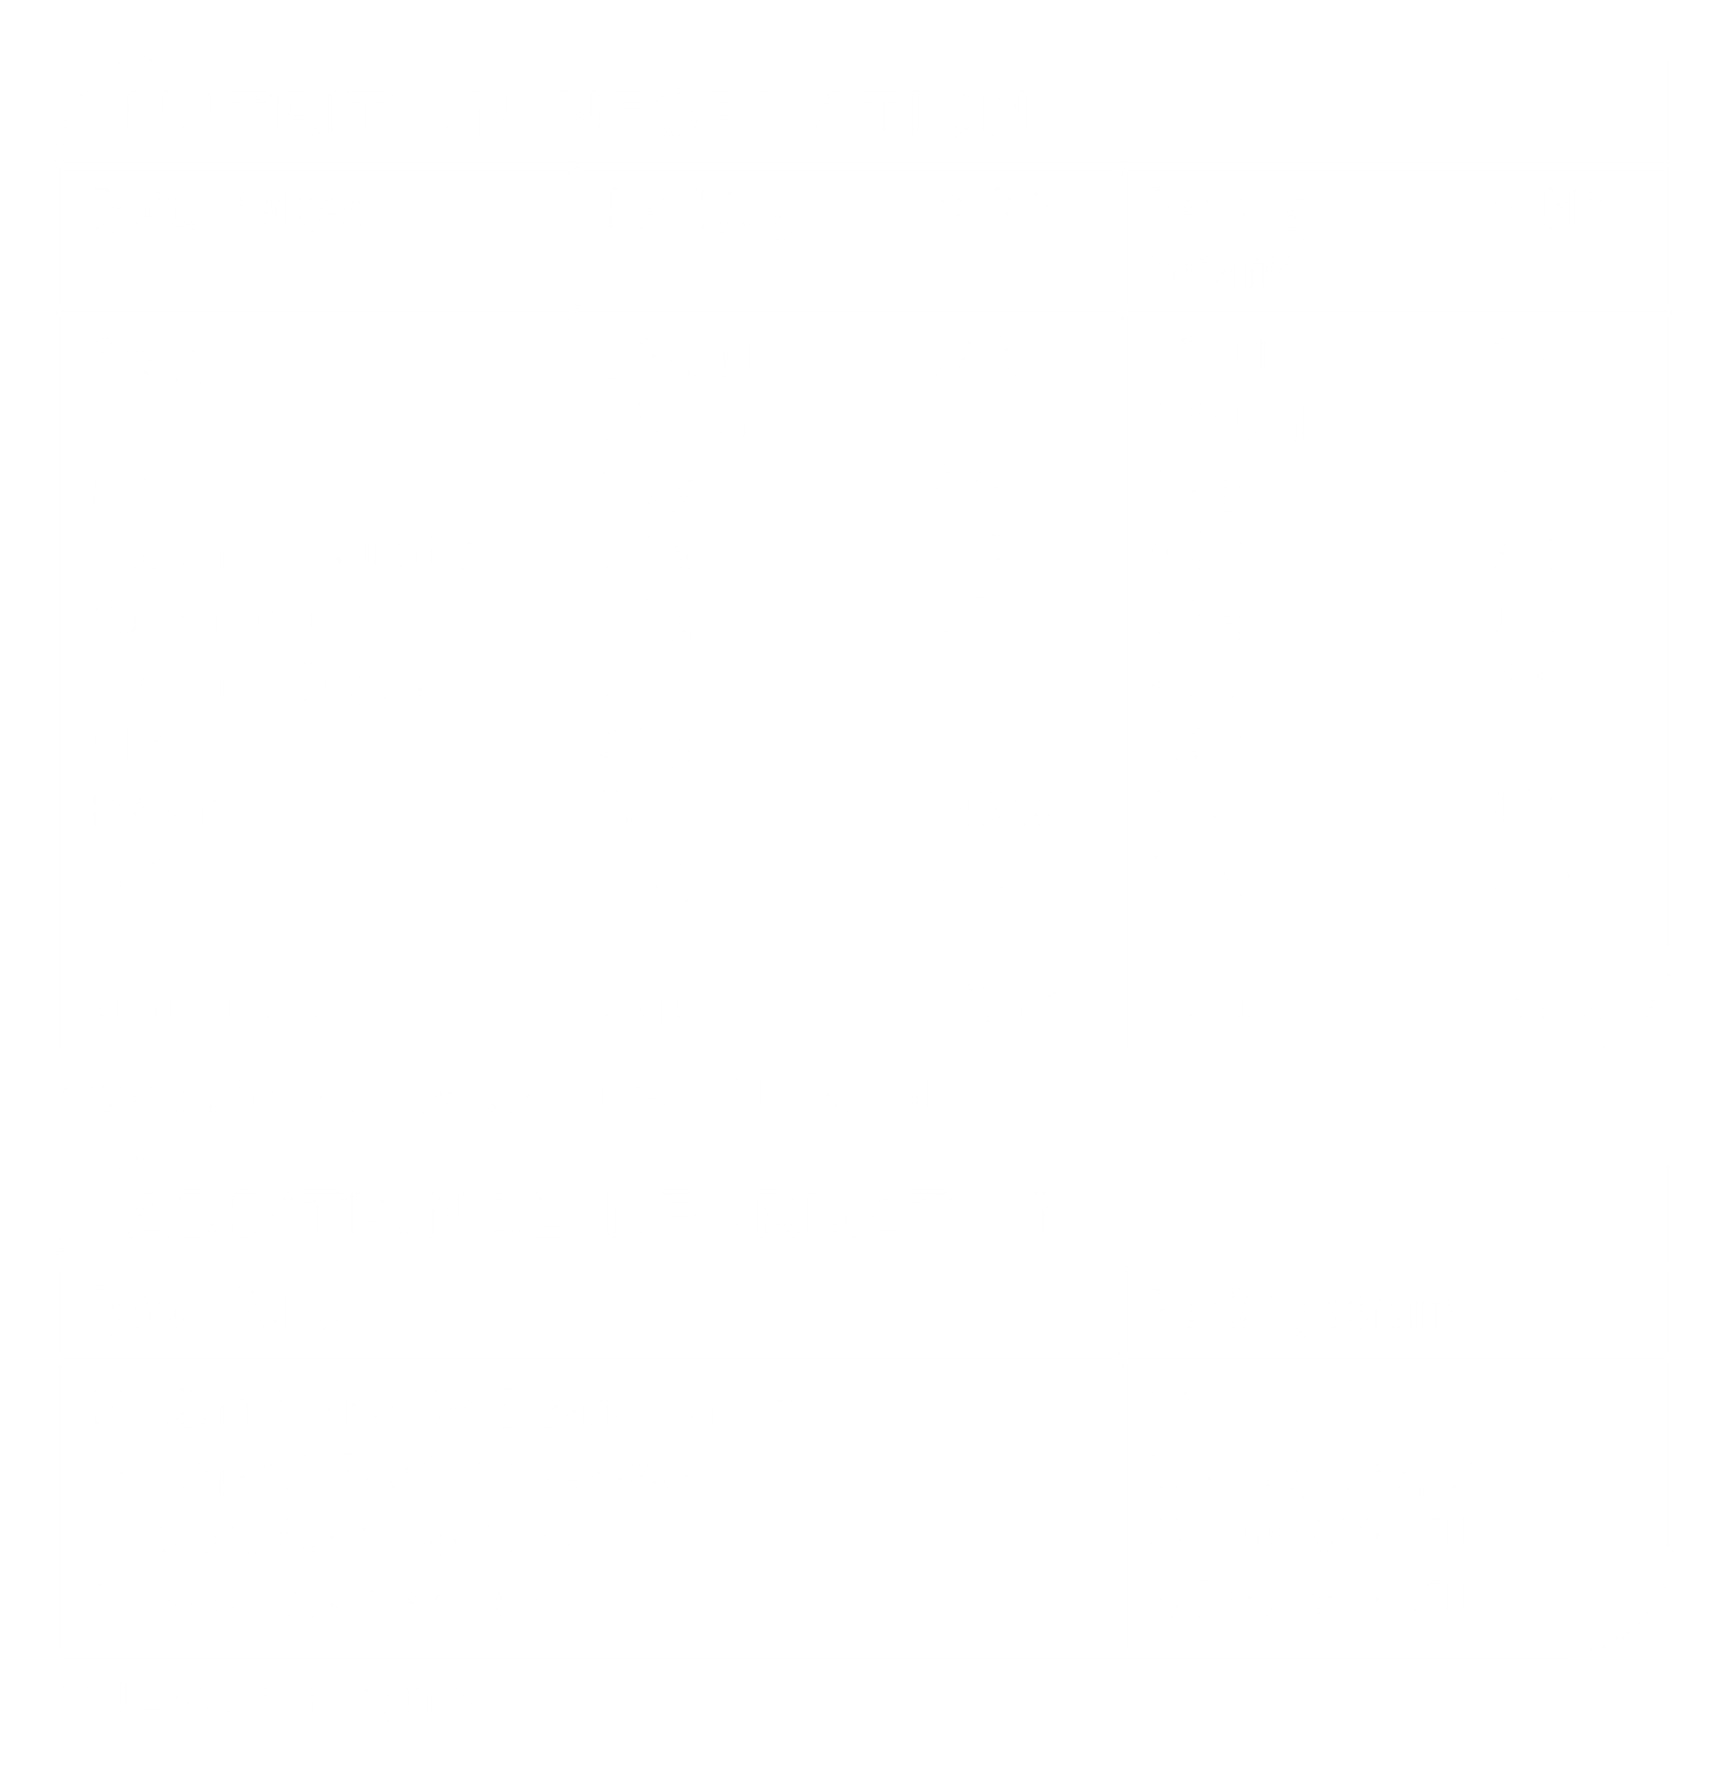 Plant-Based Protein (Sample)